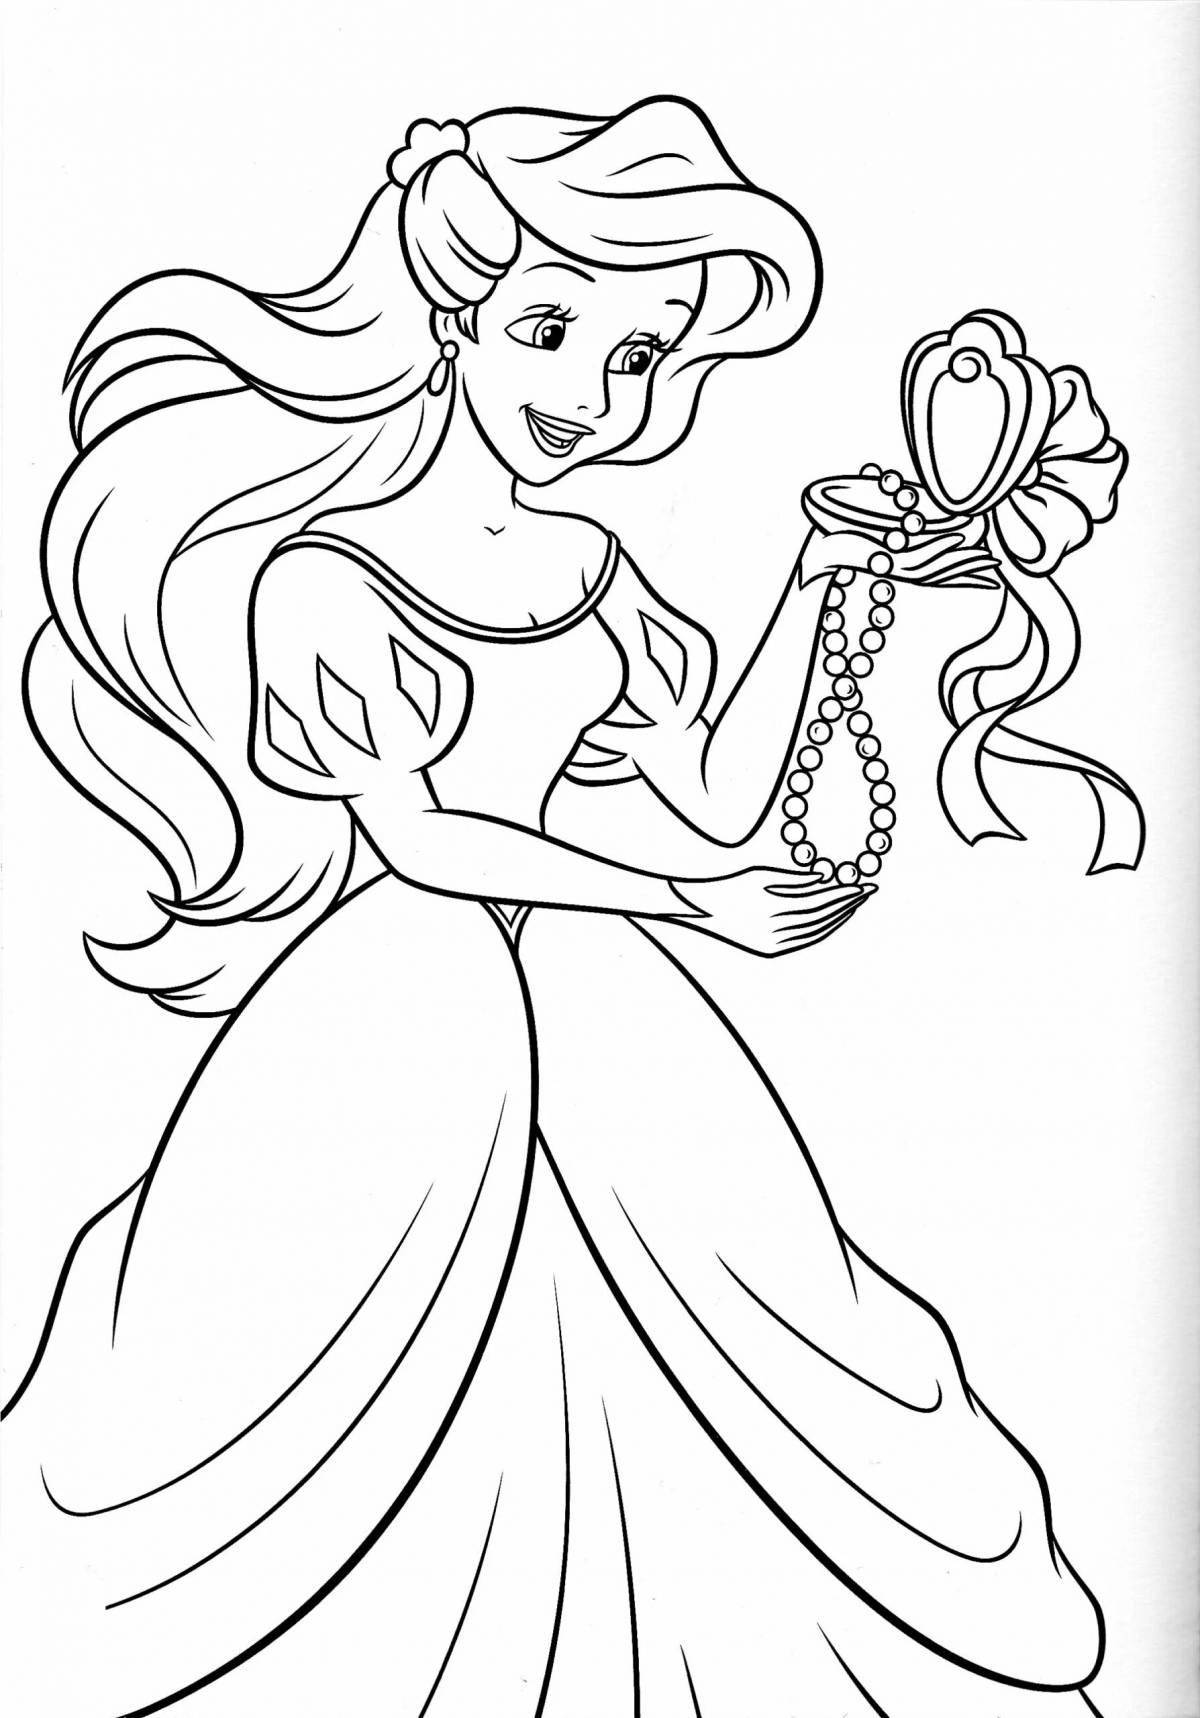 Cute disney coloring book for 6-7 year olds